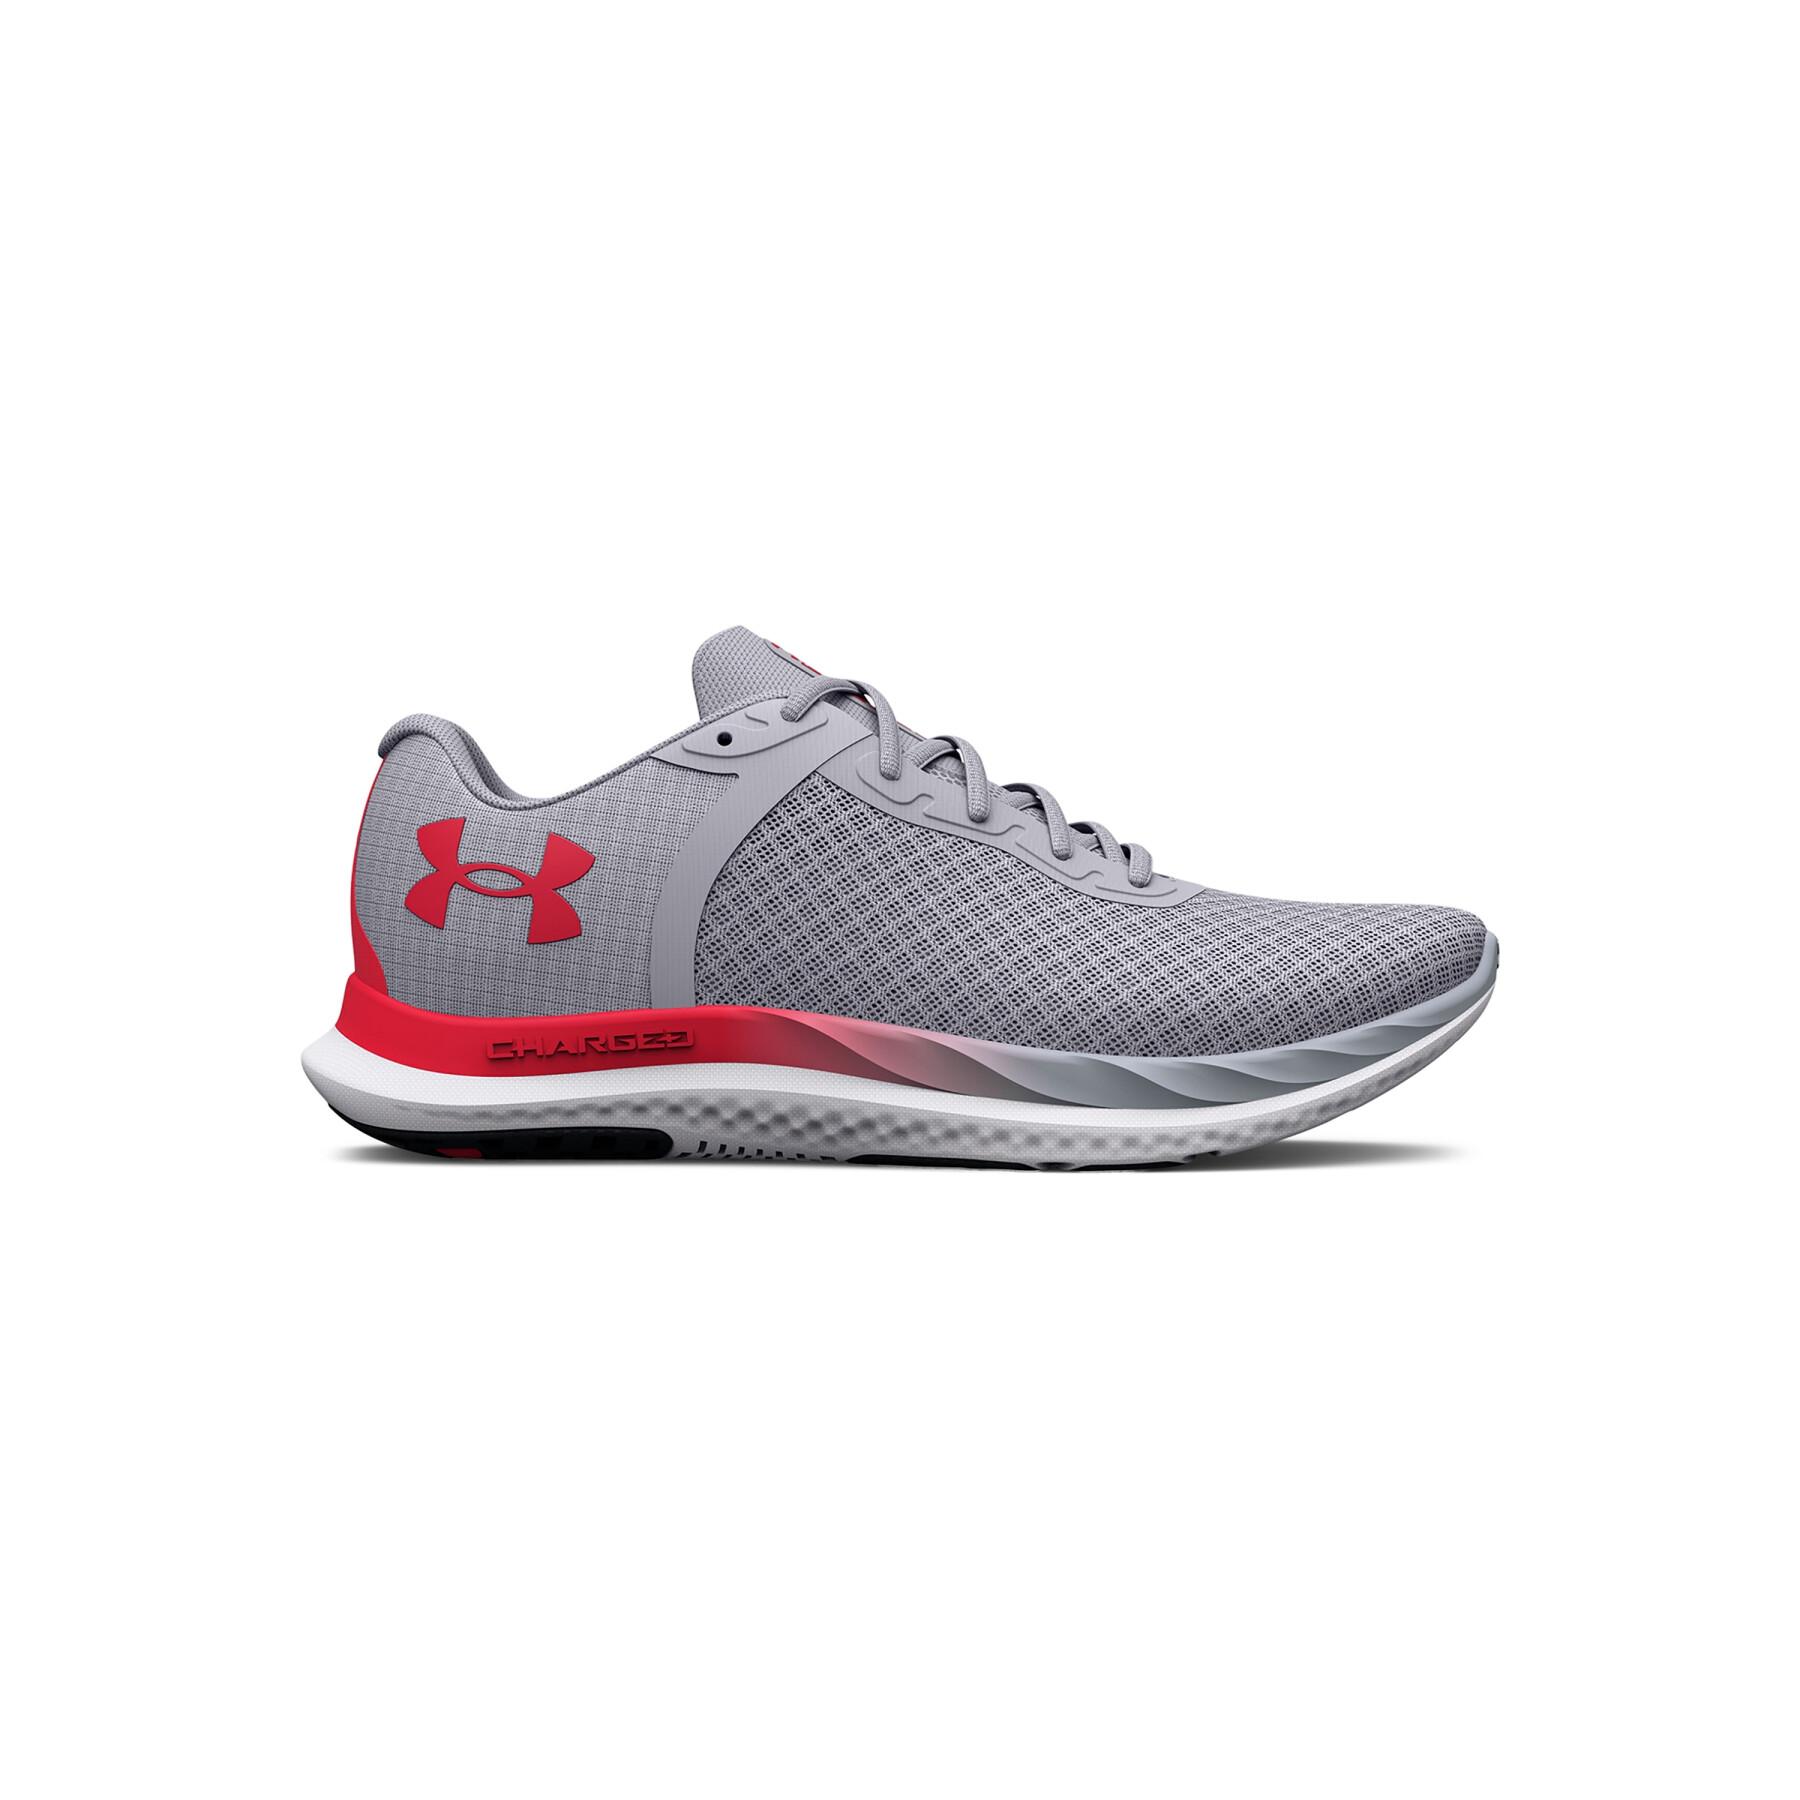 Buty do biegania Under Armour Charged breeze